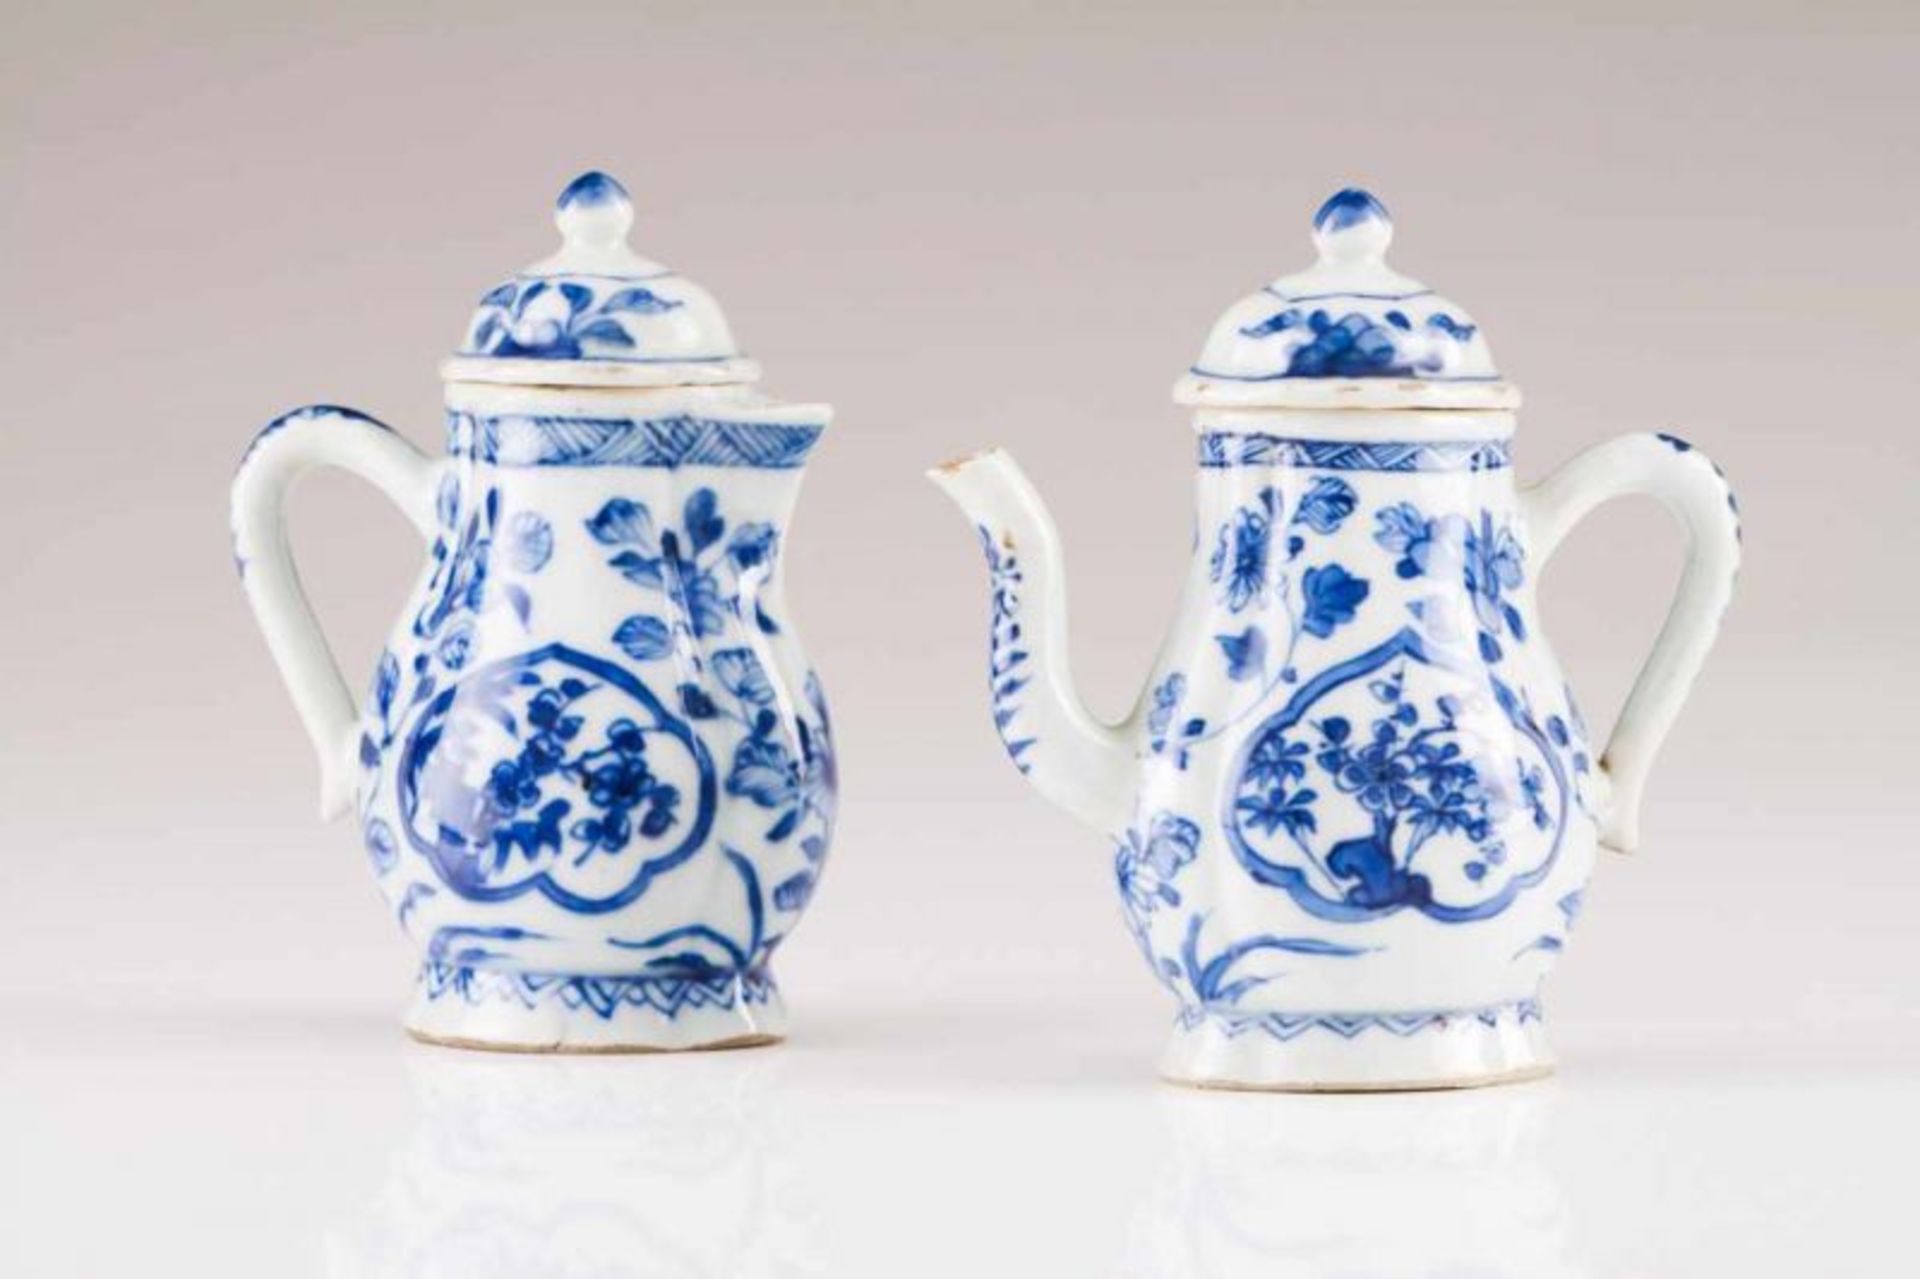 Two cruets with cover Chinese export porcelain Blue underglaze decoration depicting floral motifs